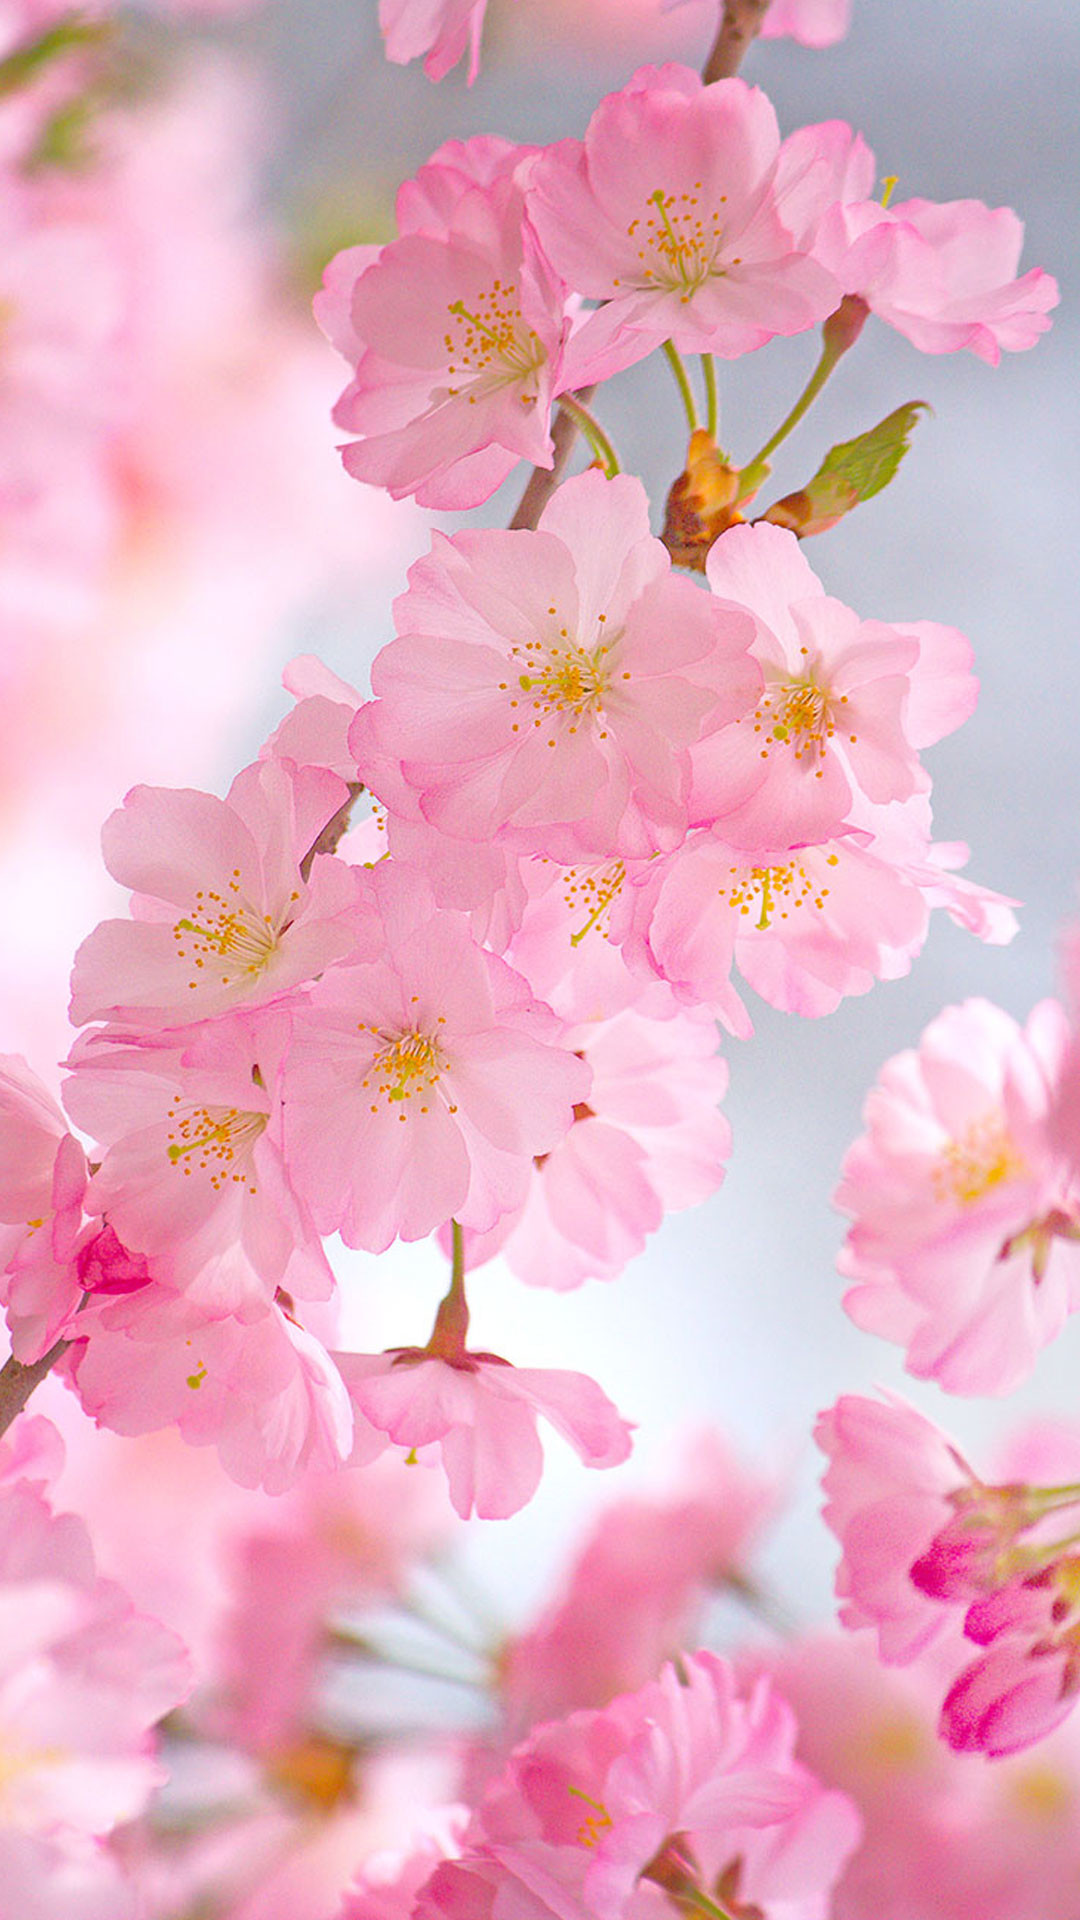 Cherry Blossom iPhone Wallpaper Download Free  Cherry blossom wallpaper Cherry  blossom background Japanese cherry blossom